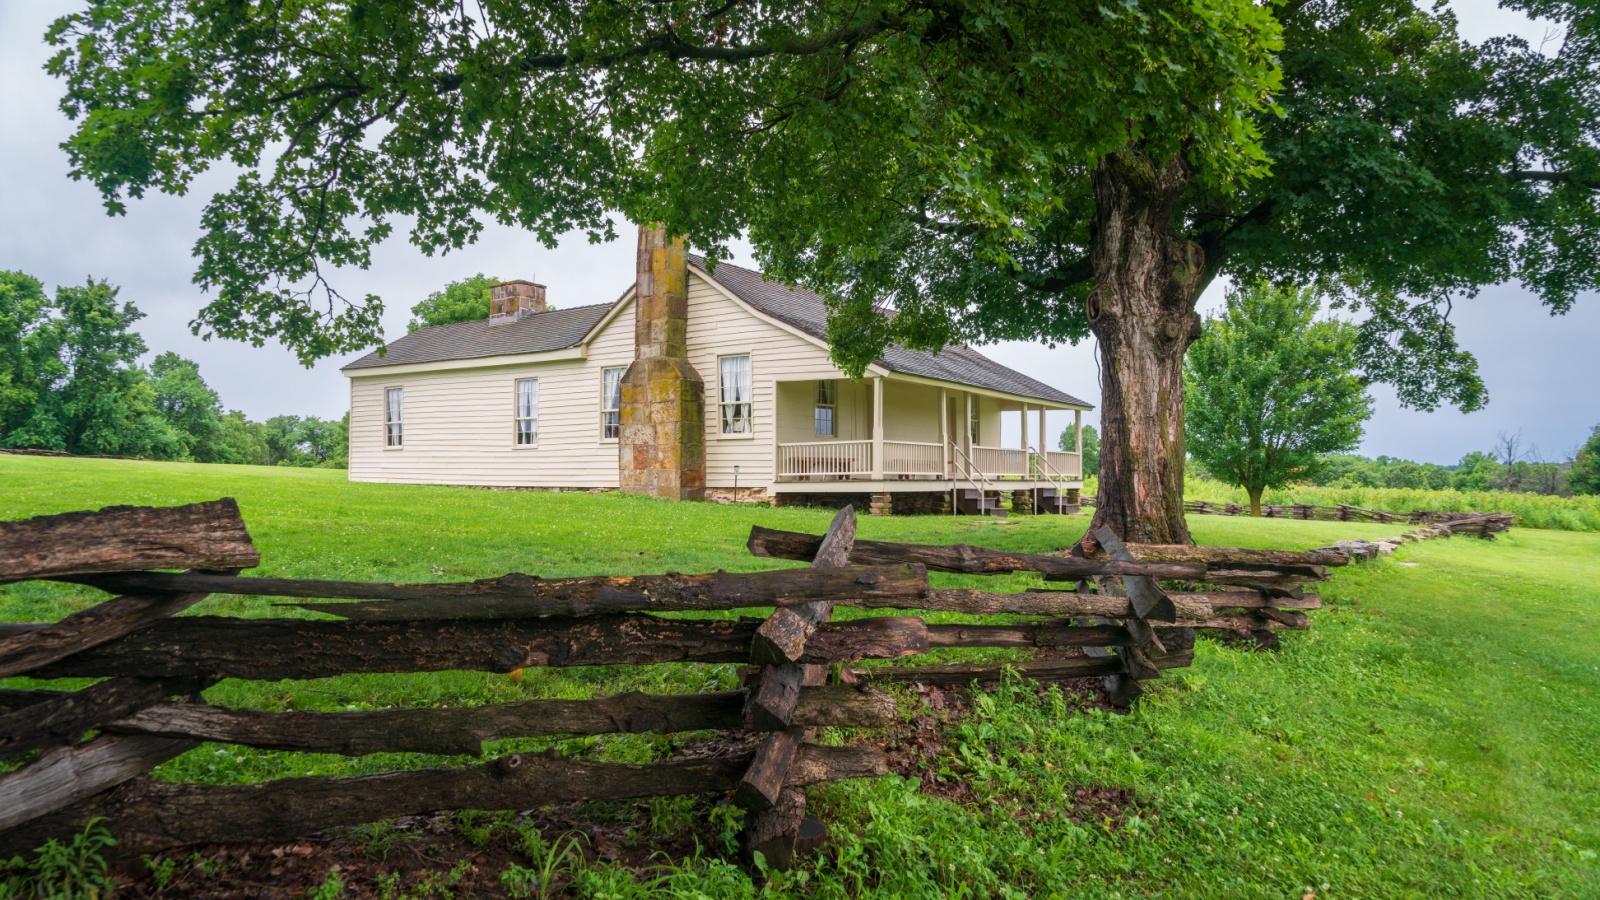 image credit: Zack Frank/Shutterstock <p>Wilson’s Creek was the site of the first major Civil War battle fought west of the Mississippi River, marking a Confederate victory. Wilson’s Creek National Battlefield preserves this significant site and offers a museum, a driving tour, and walking trails. The battlefield is particularly noted for its reenactments and educational programs, which vividly illustrate the tactics and challenges of the war.</p>